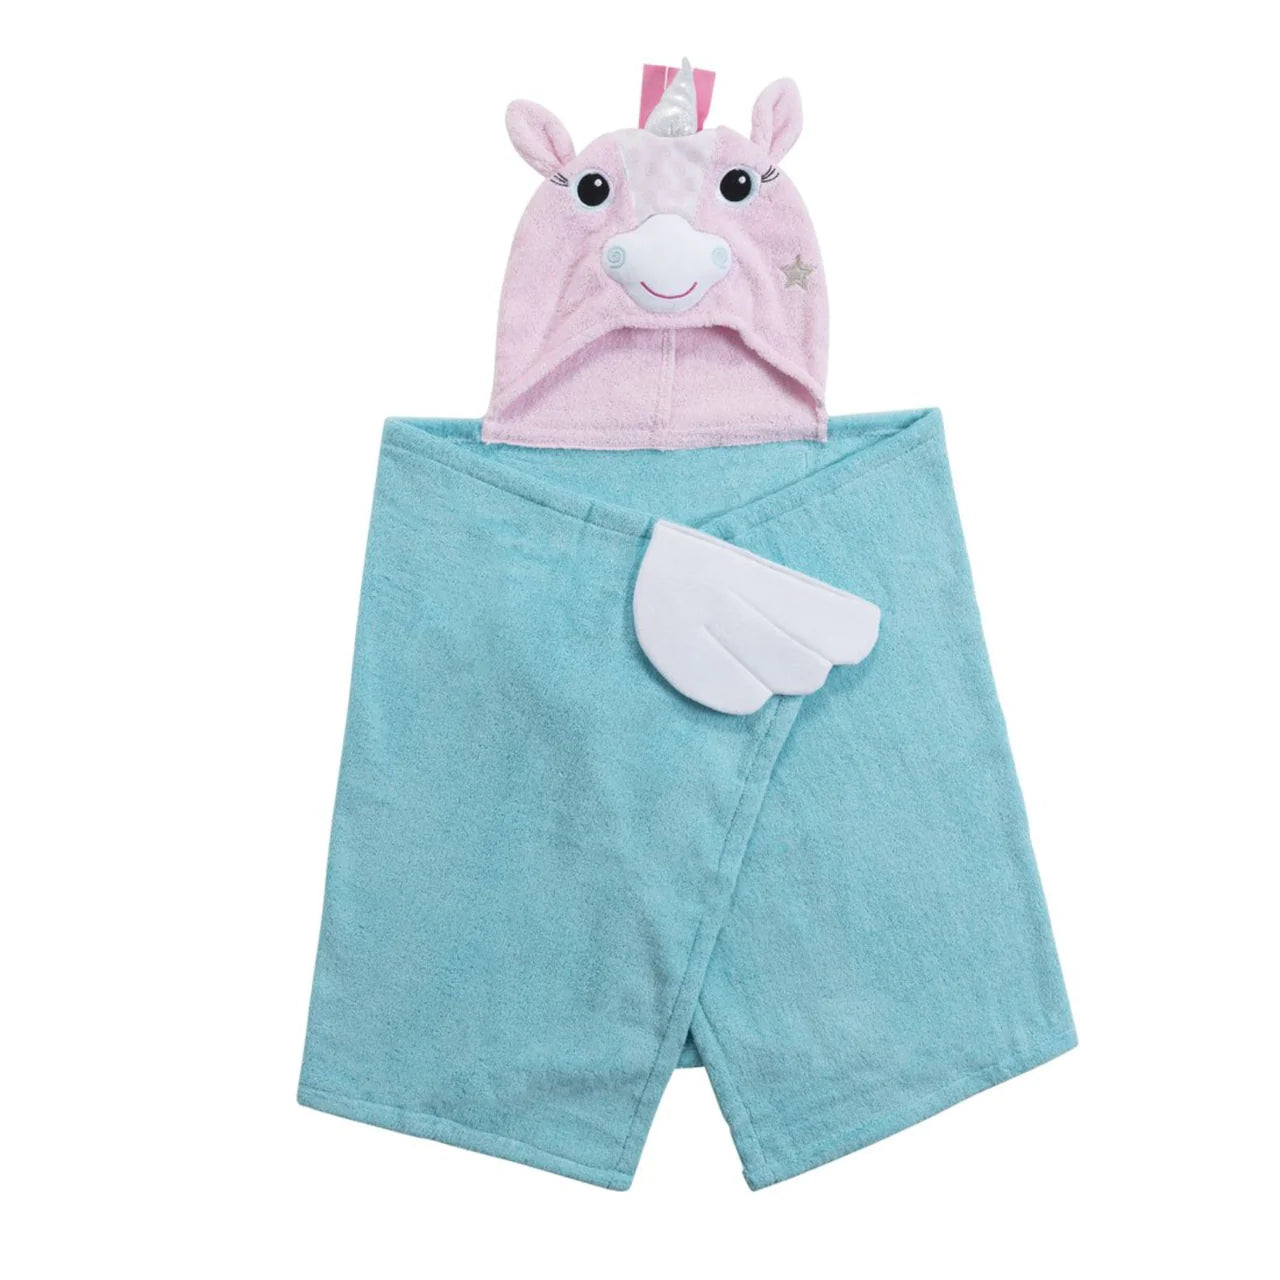 Personalized Bath Towel - Terry Hooded - Allie Alicorn